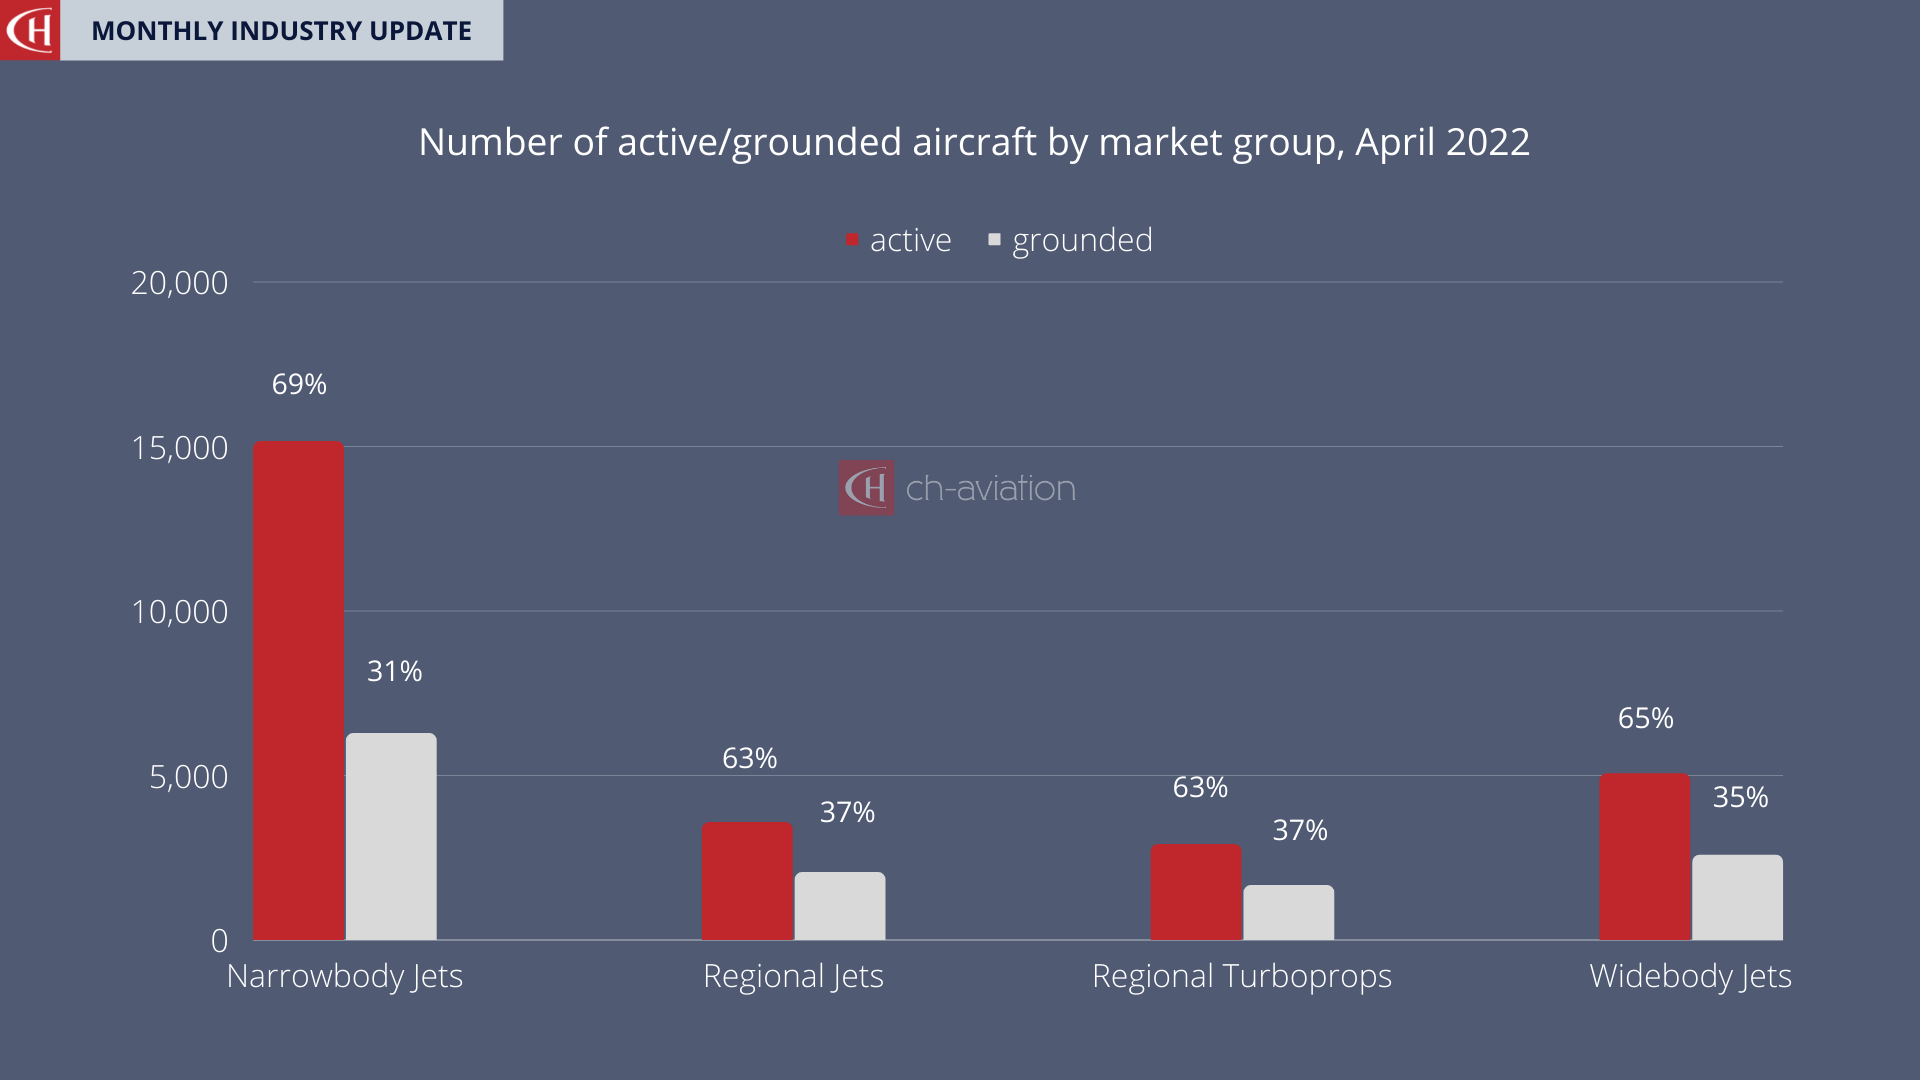 Active/grounded aircraft by market group April 2022